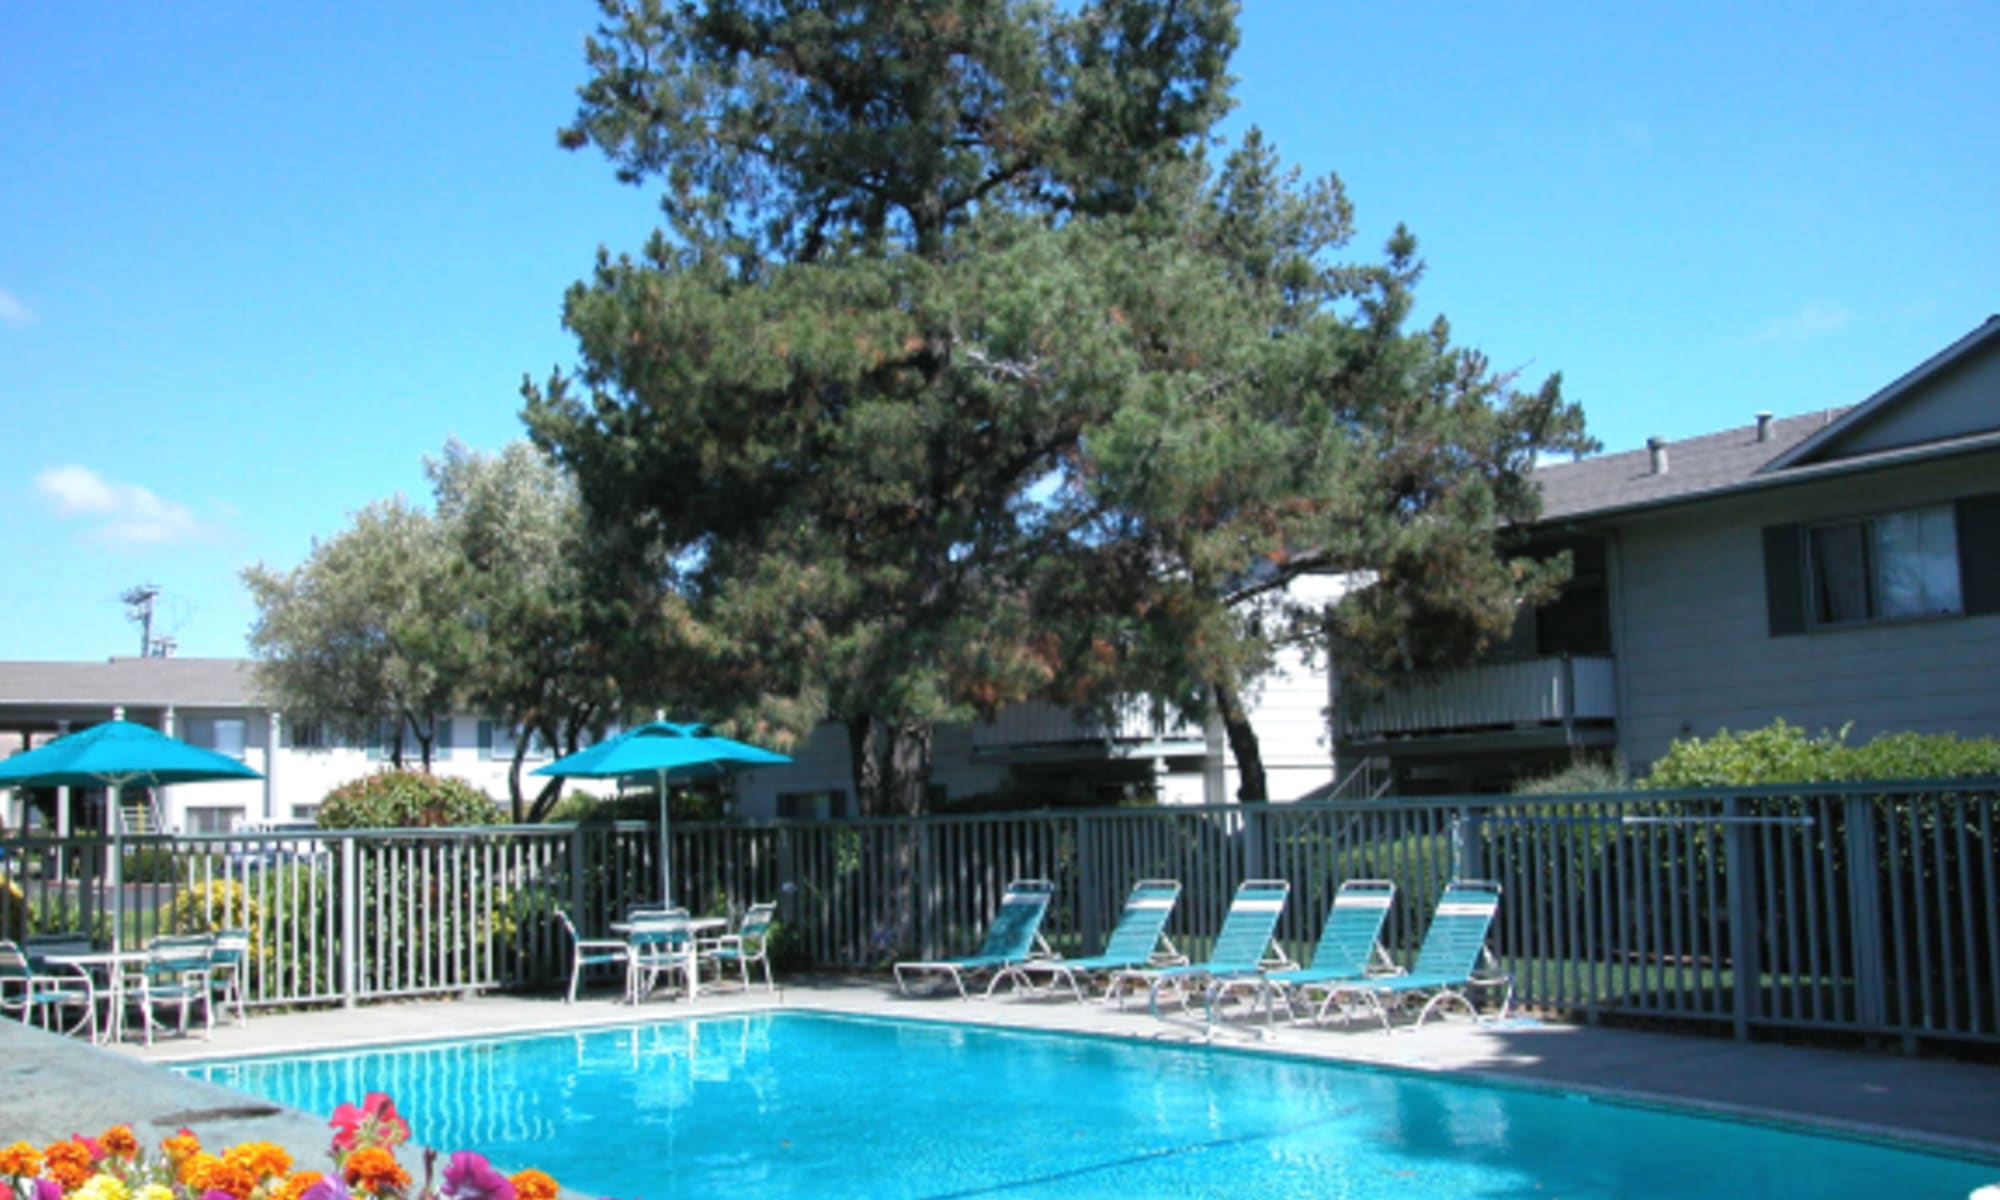 lounge chairs by the pool at Colonial Gardens in Fremont, California